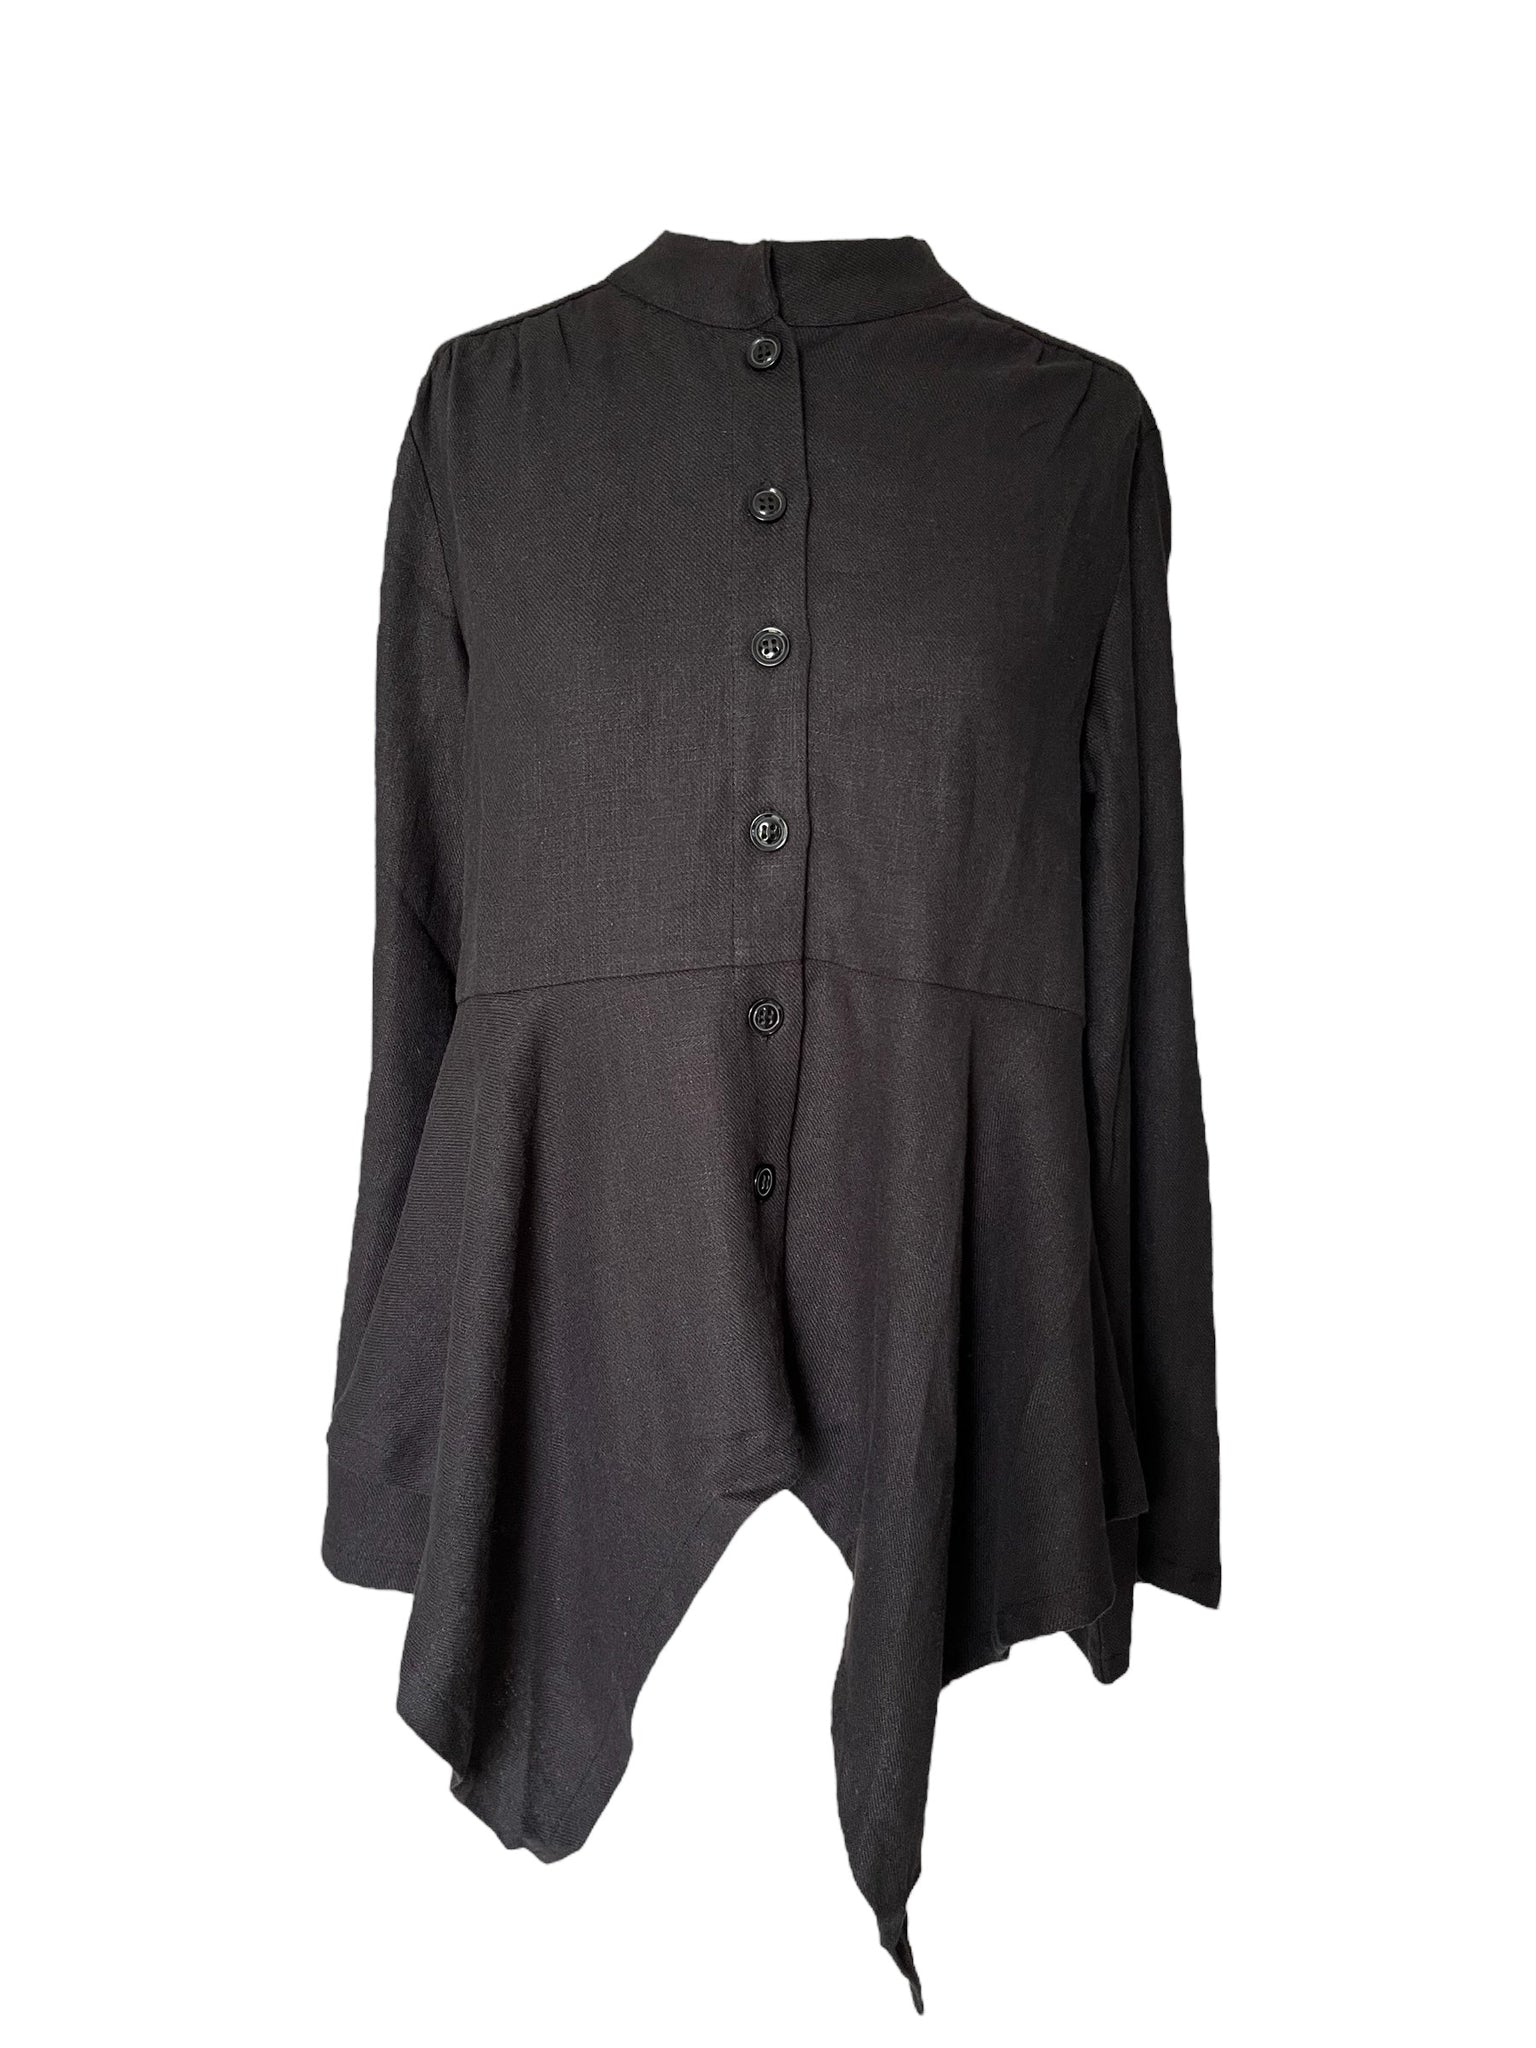 WDTS Willow Linen Jacket